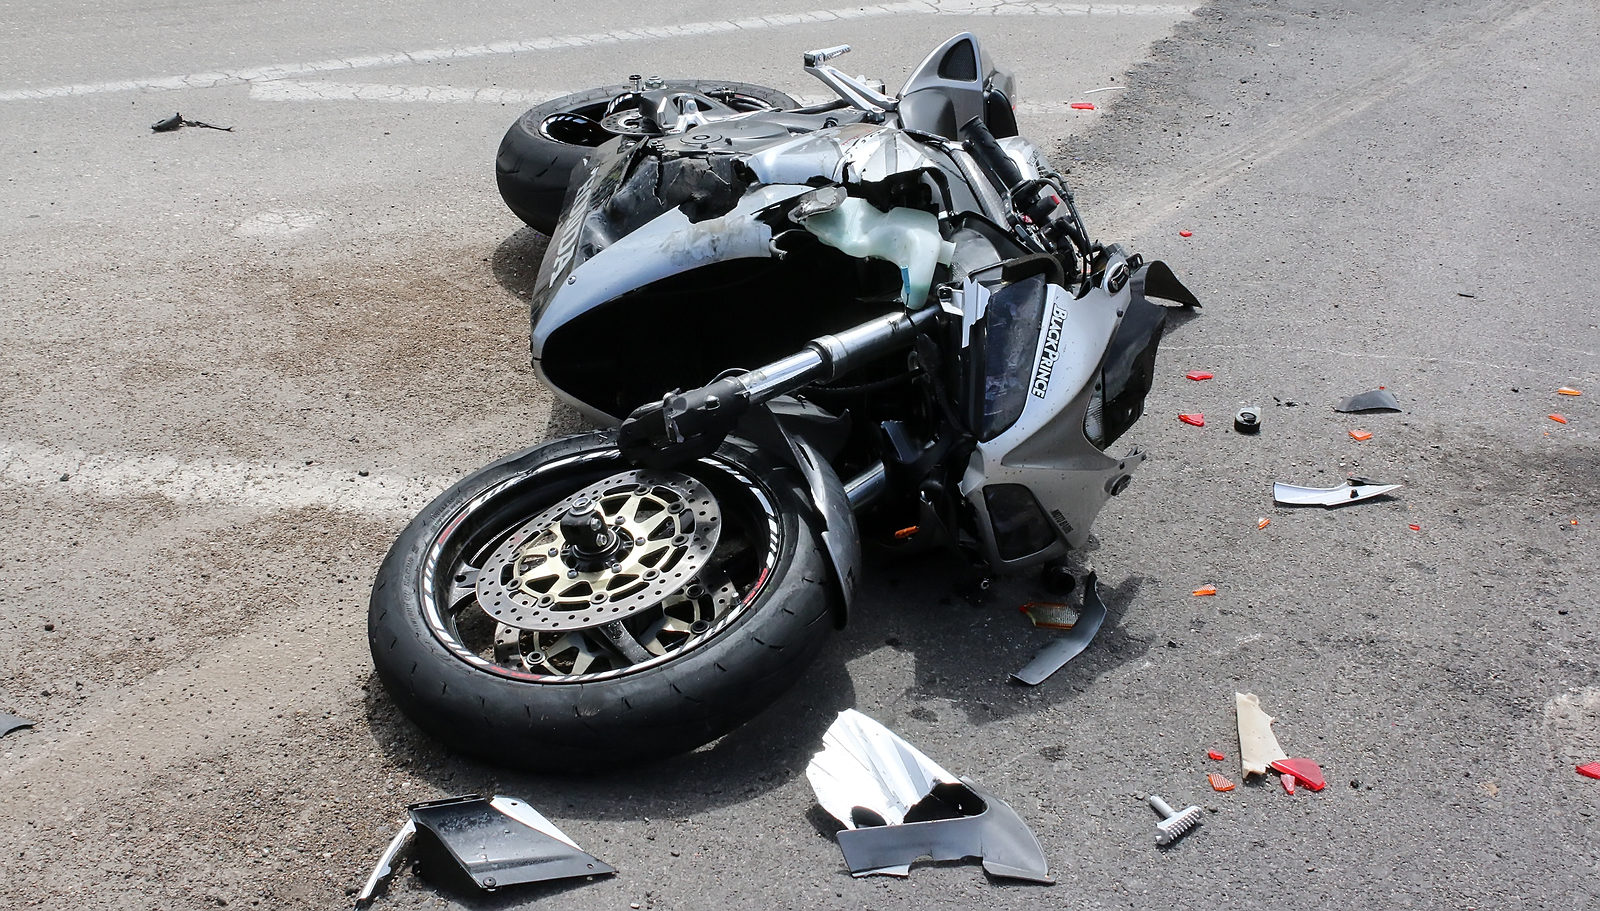 Clearwater Car Accident Attorney